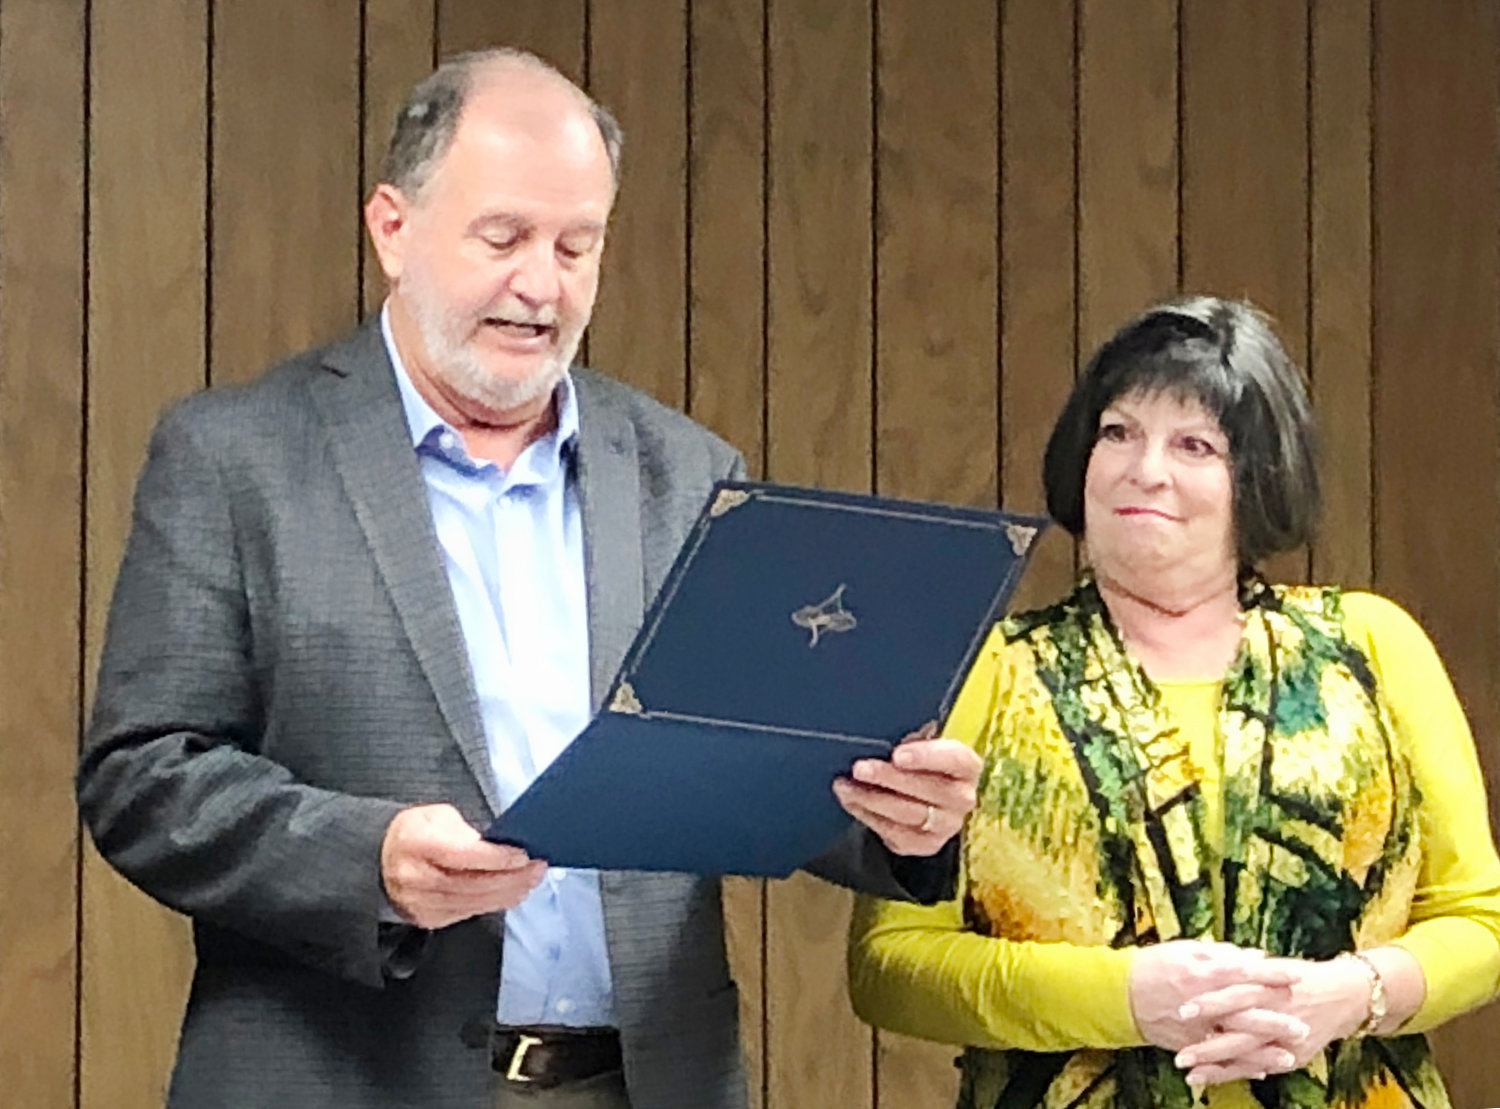 Susan Resnik receives a proclamation from Quitman Mayor Randy Dunn in
celebration of “Alzheimer’s Awareness” education sponsored by the Quitman
Pilot Club.